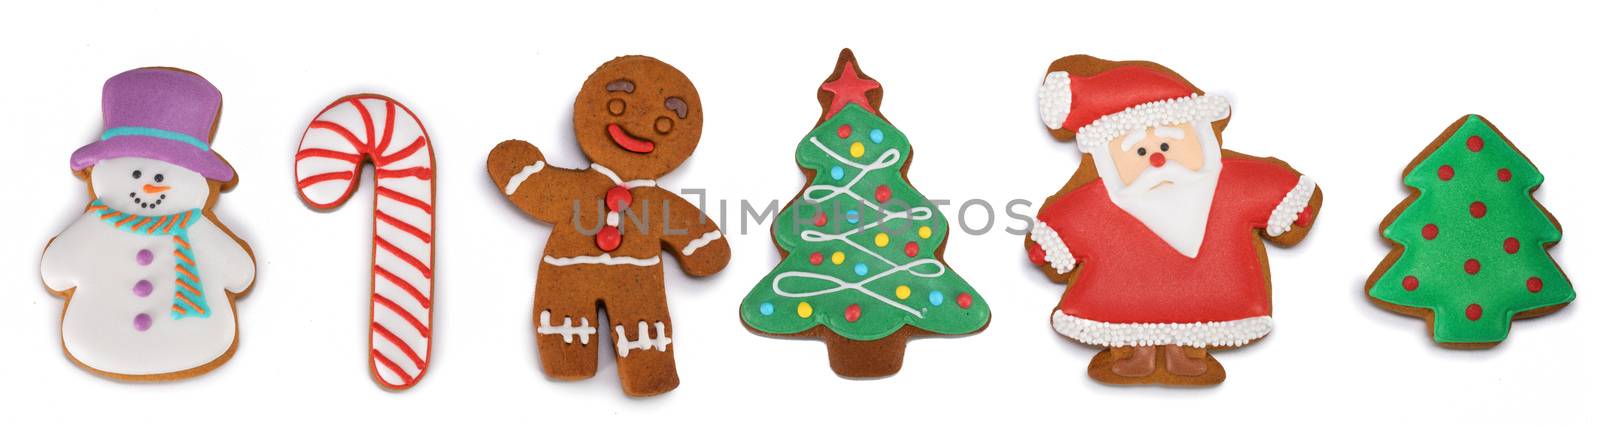 Gingerbread cookies set collection isolated on white background